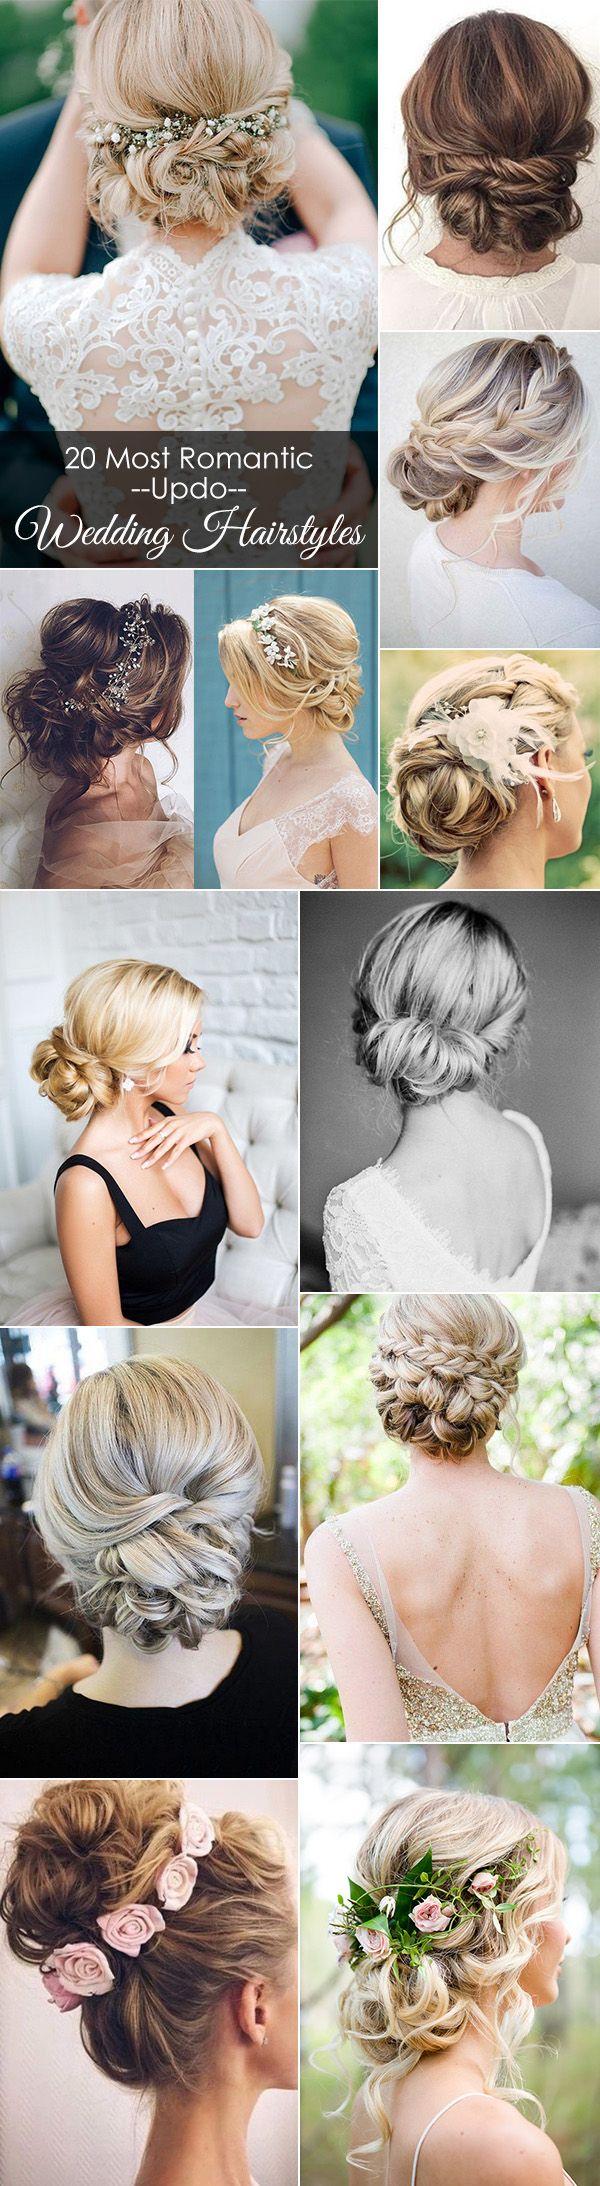 Hochzeit - 20 Most Romantic Bridal Updos Wedding Hairstyles To Inspire Your Big Day